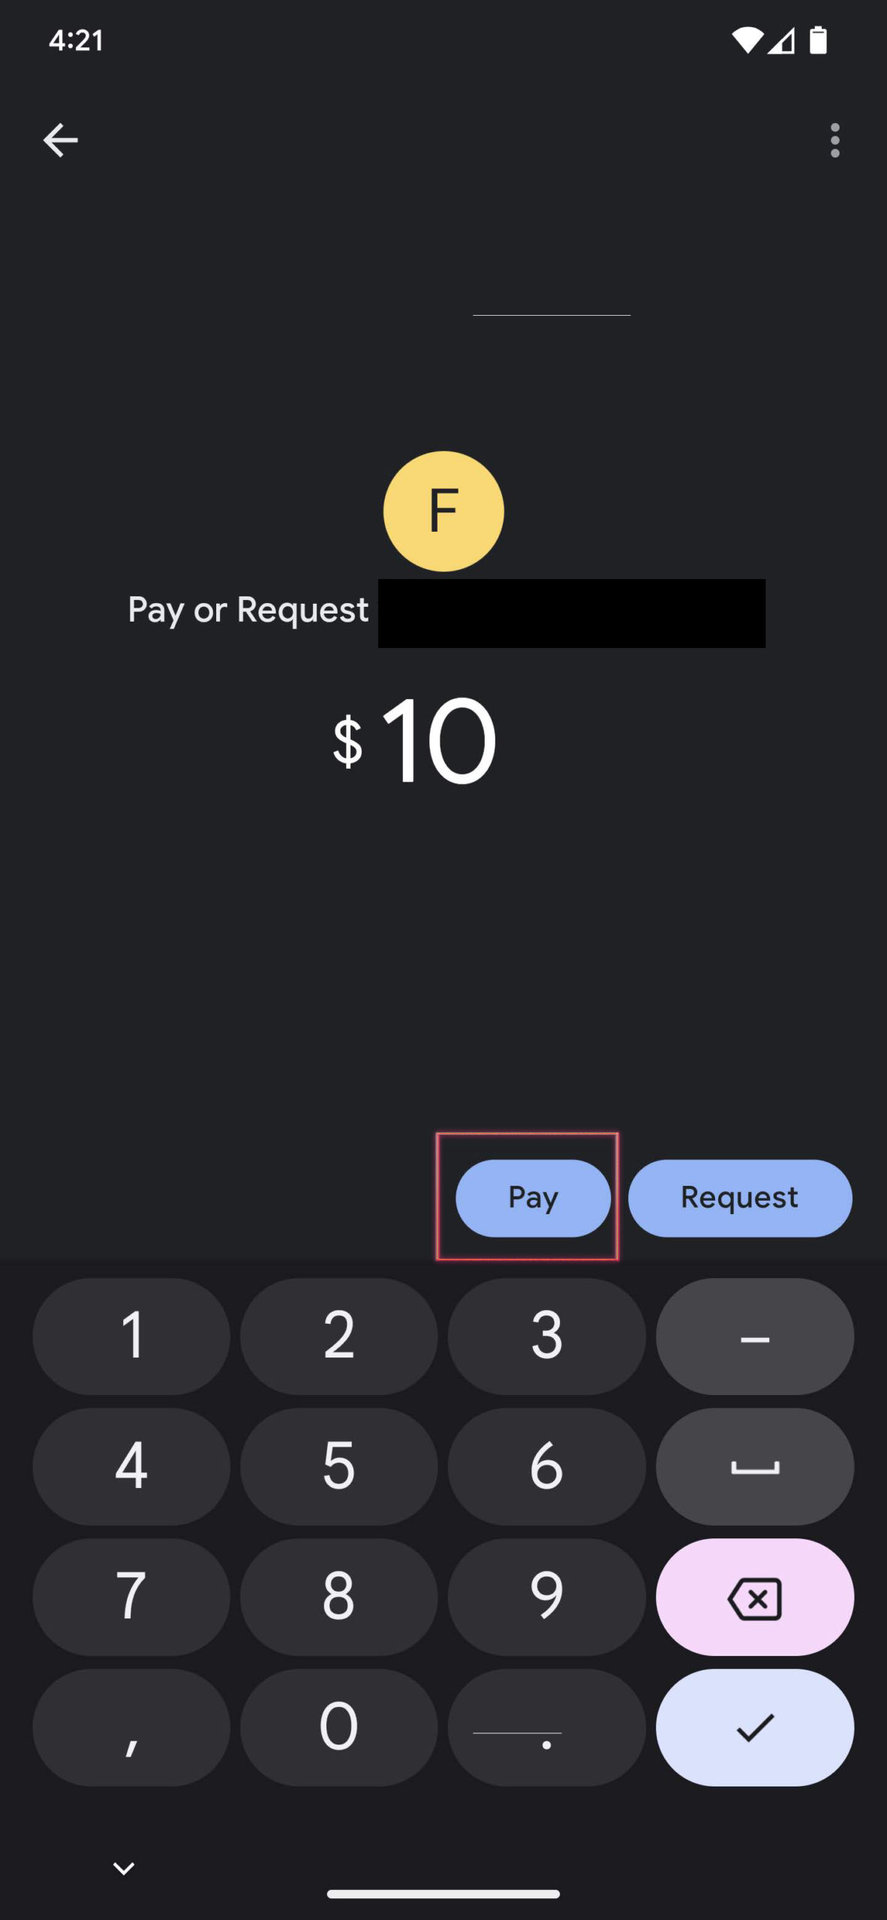 Send money to others using Google Pay 3